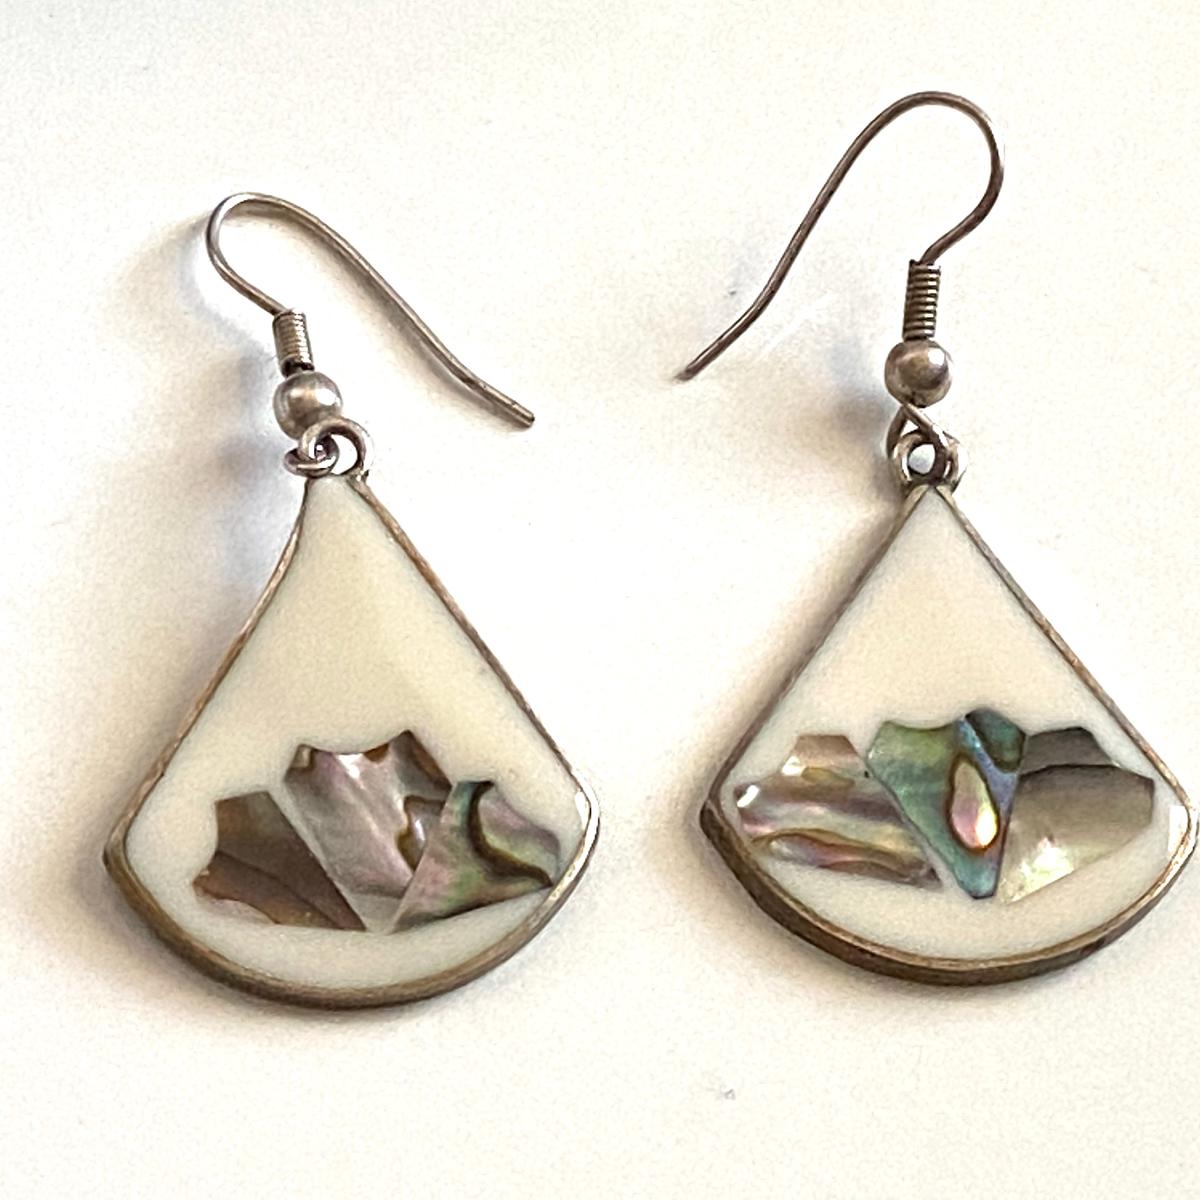 Silver Plated Abalone Pierced Earrings Made in Mexico